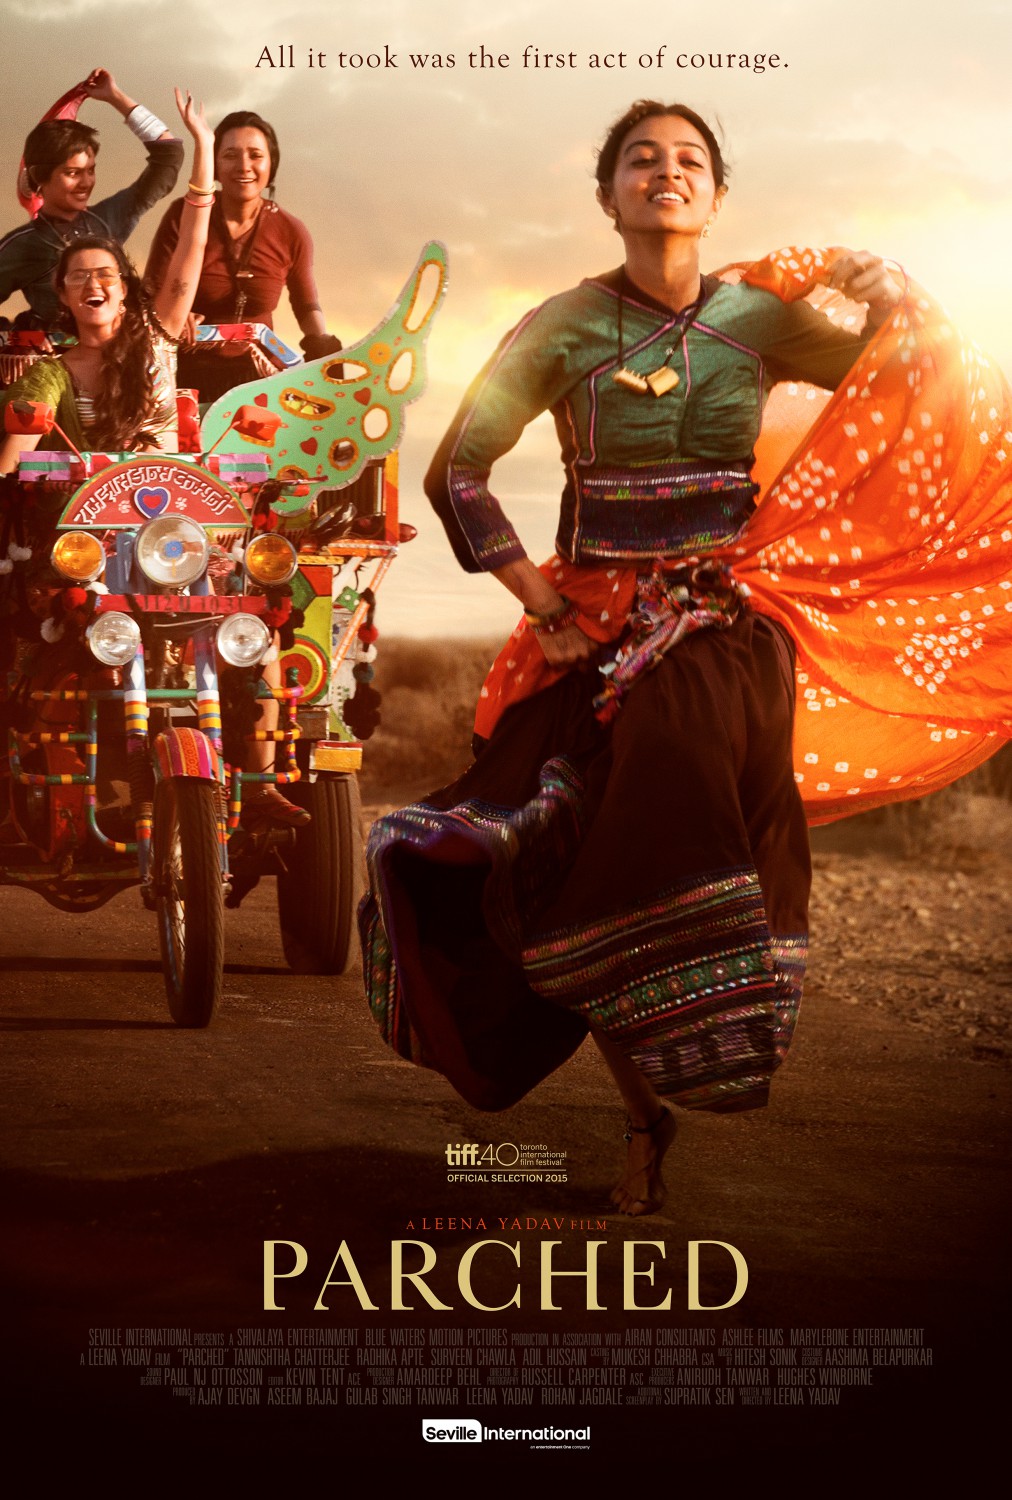 Parched-Leena Yadav-Movie-2016-Trailer-Review-Radhika Apte-Surveen Chawala-Bollywoodirect-Offical-Poster